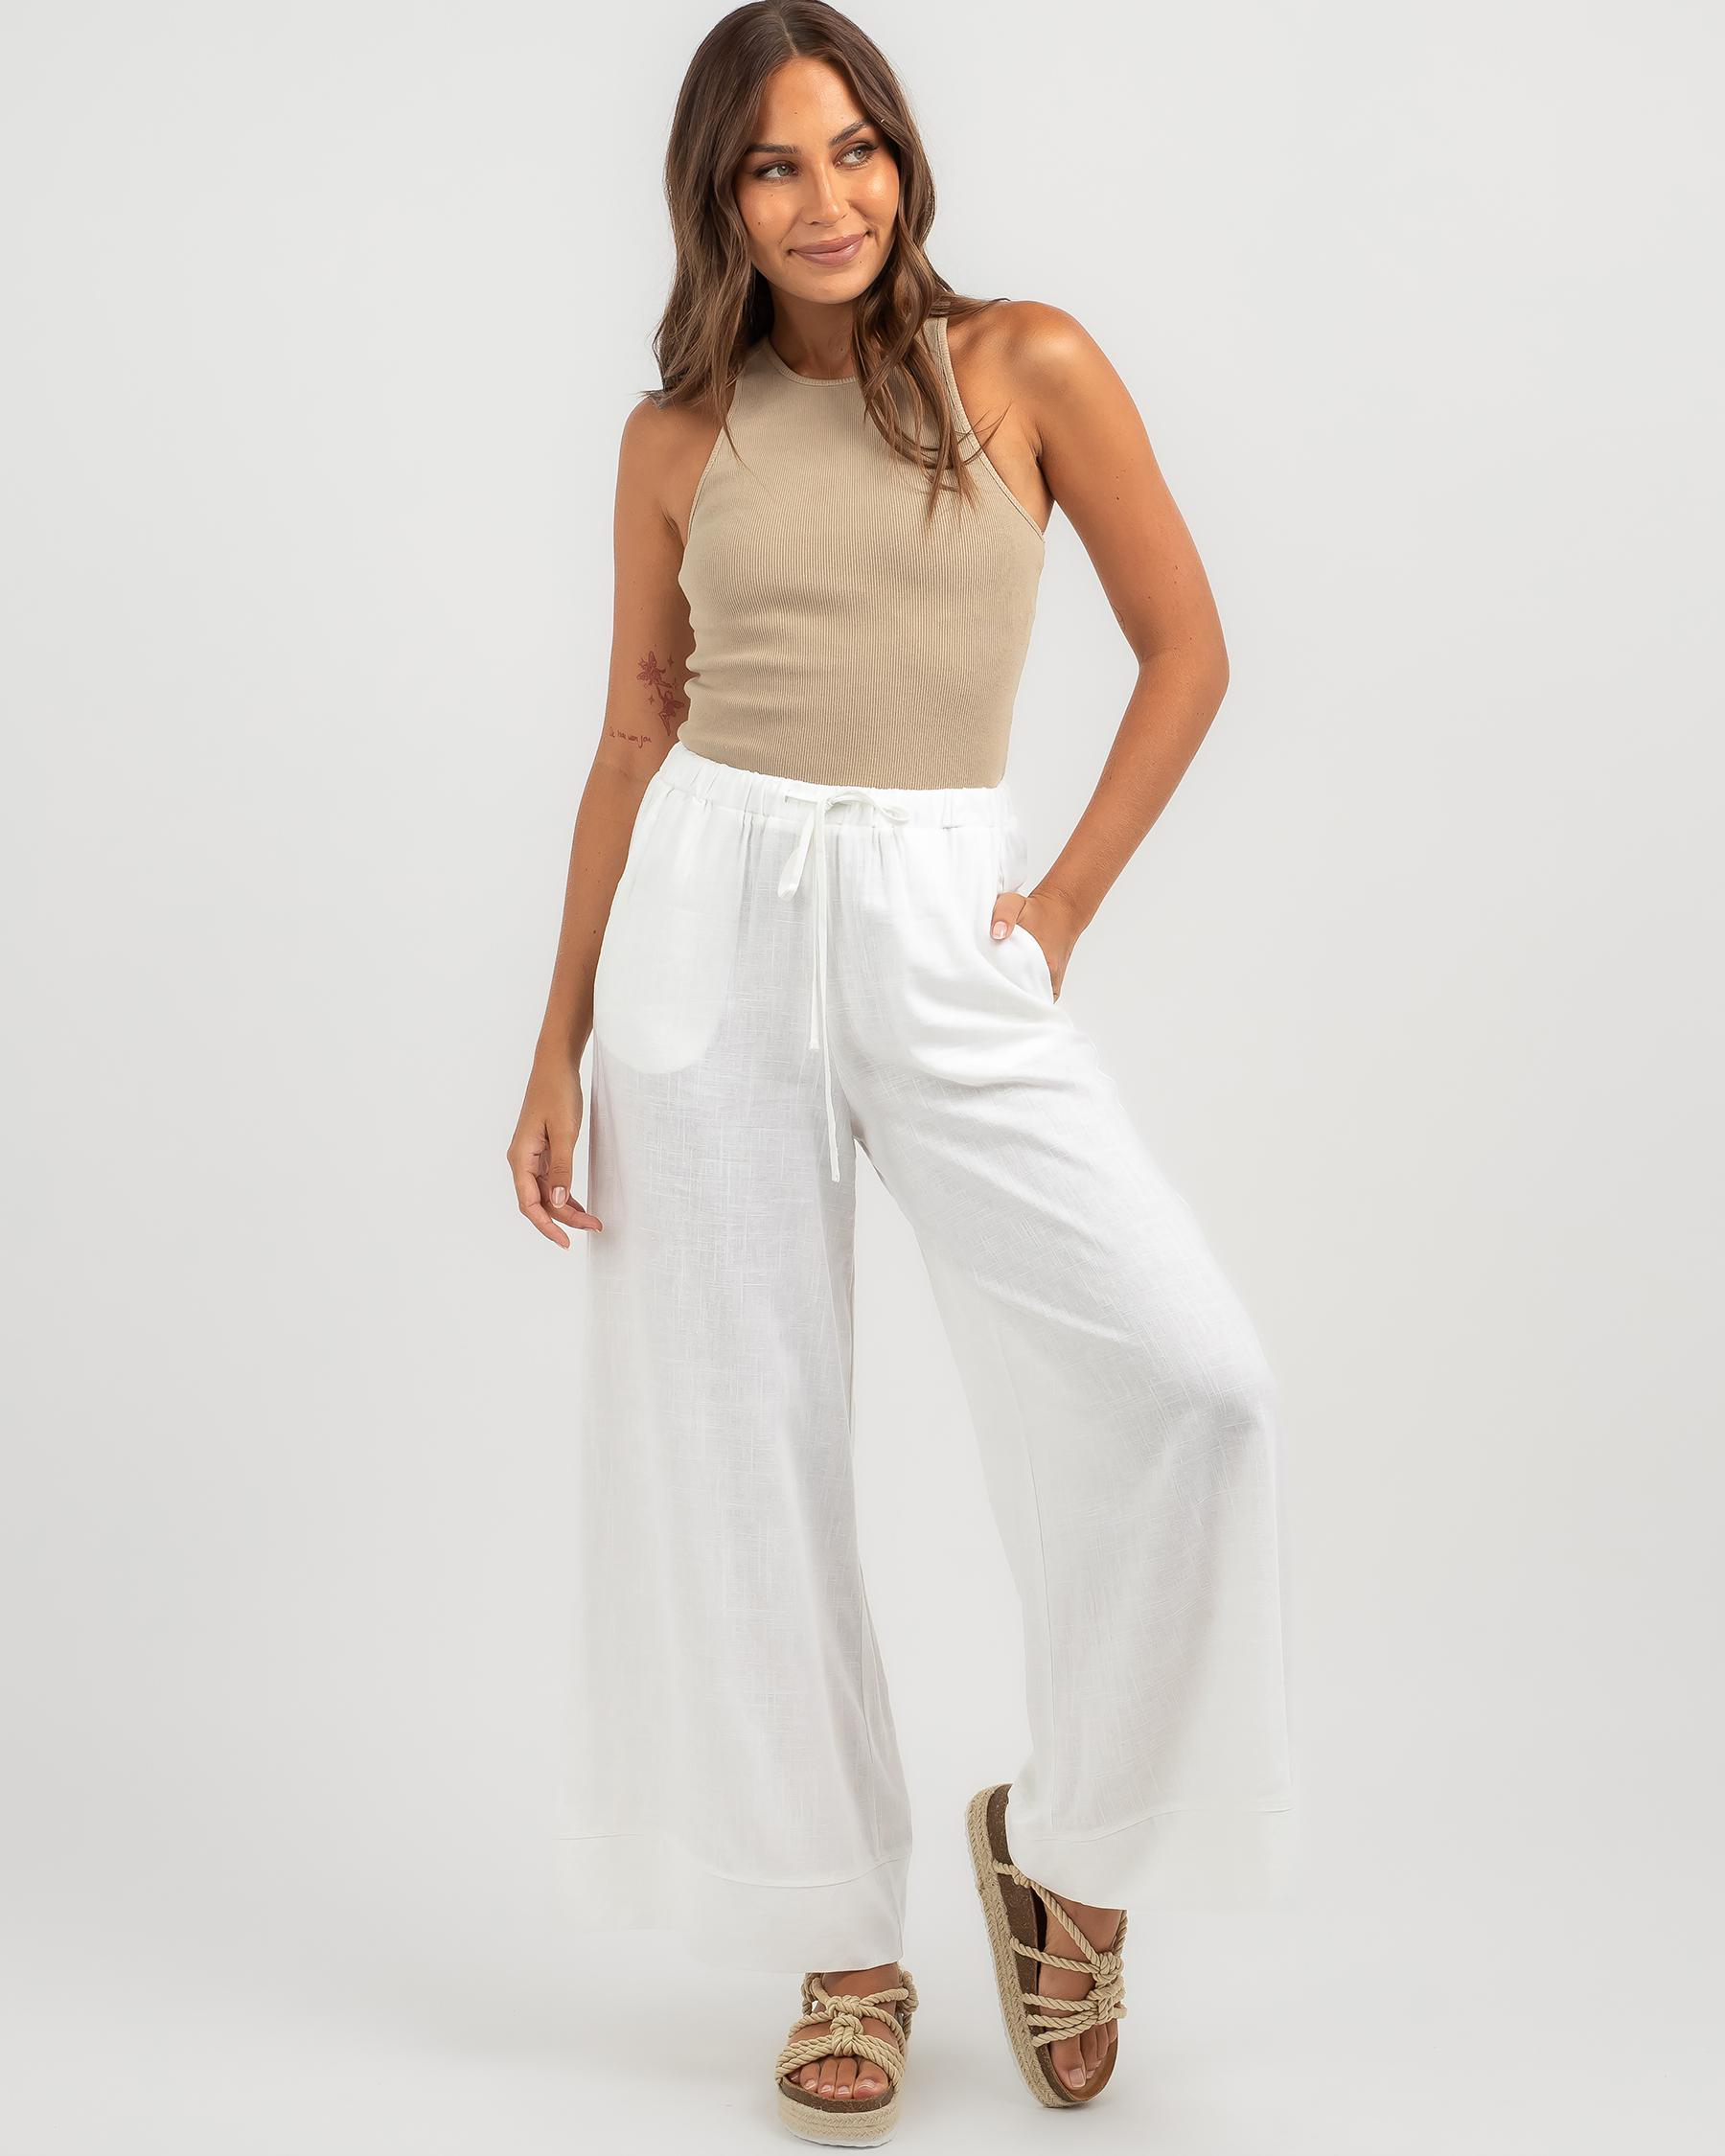 Shop Wits The Label Newport Beach Pants In White - Fast Shipping & Easy ...